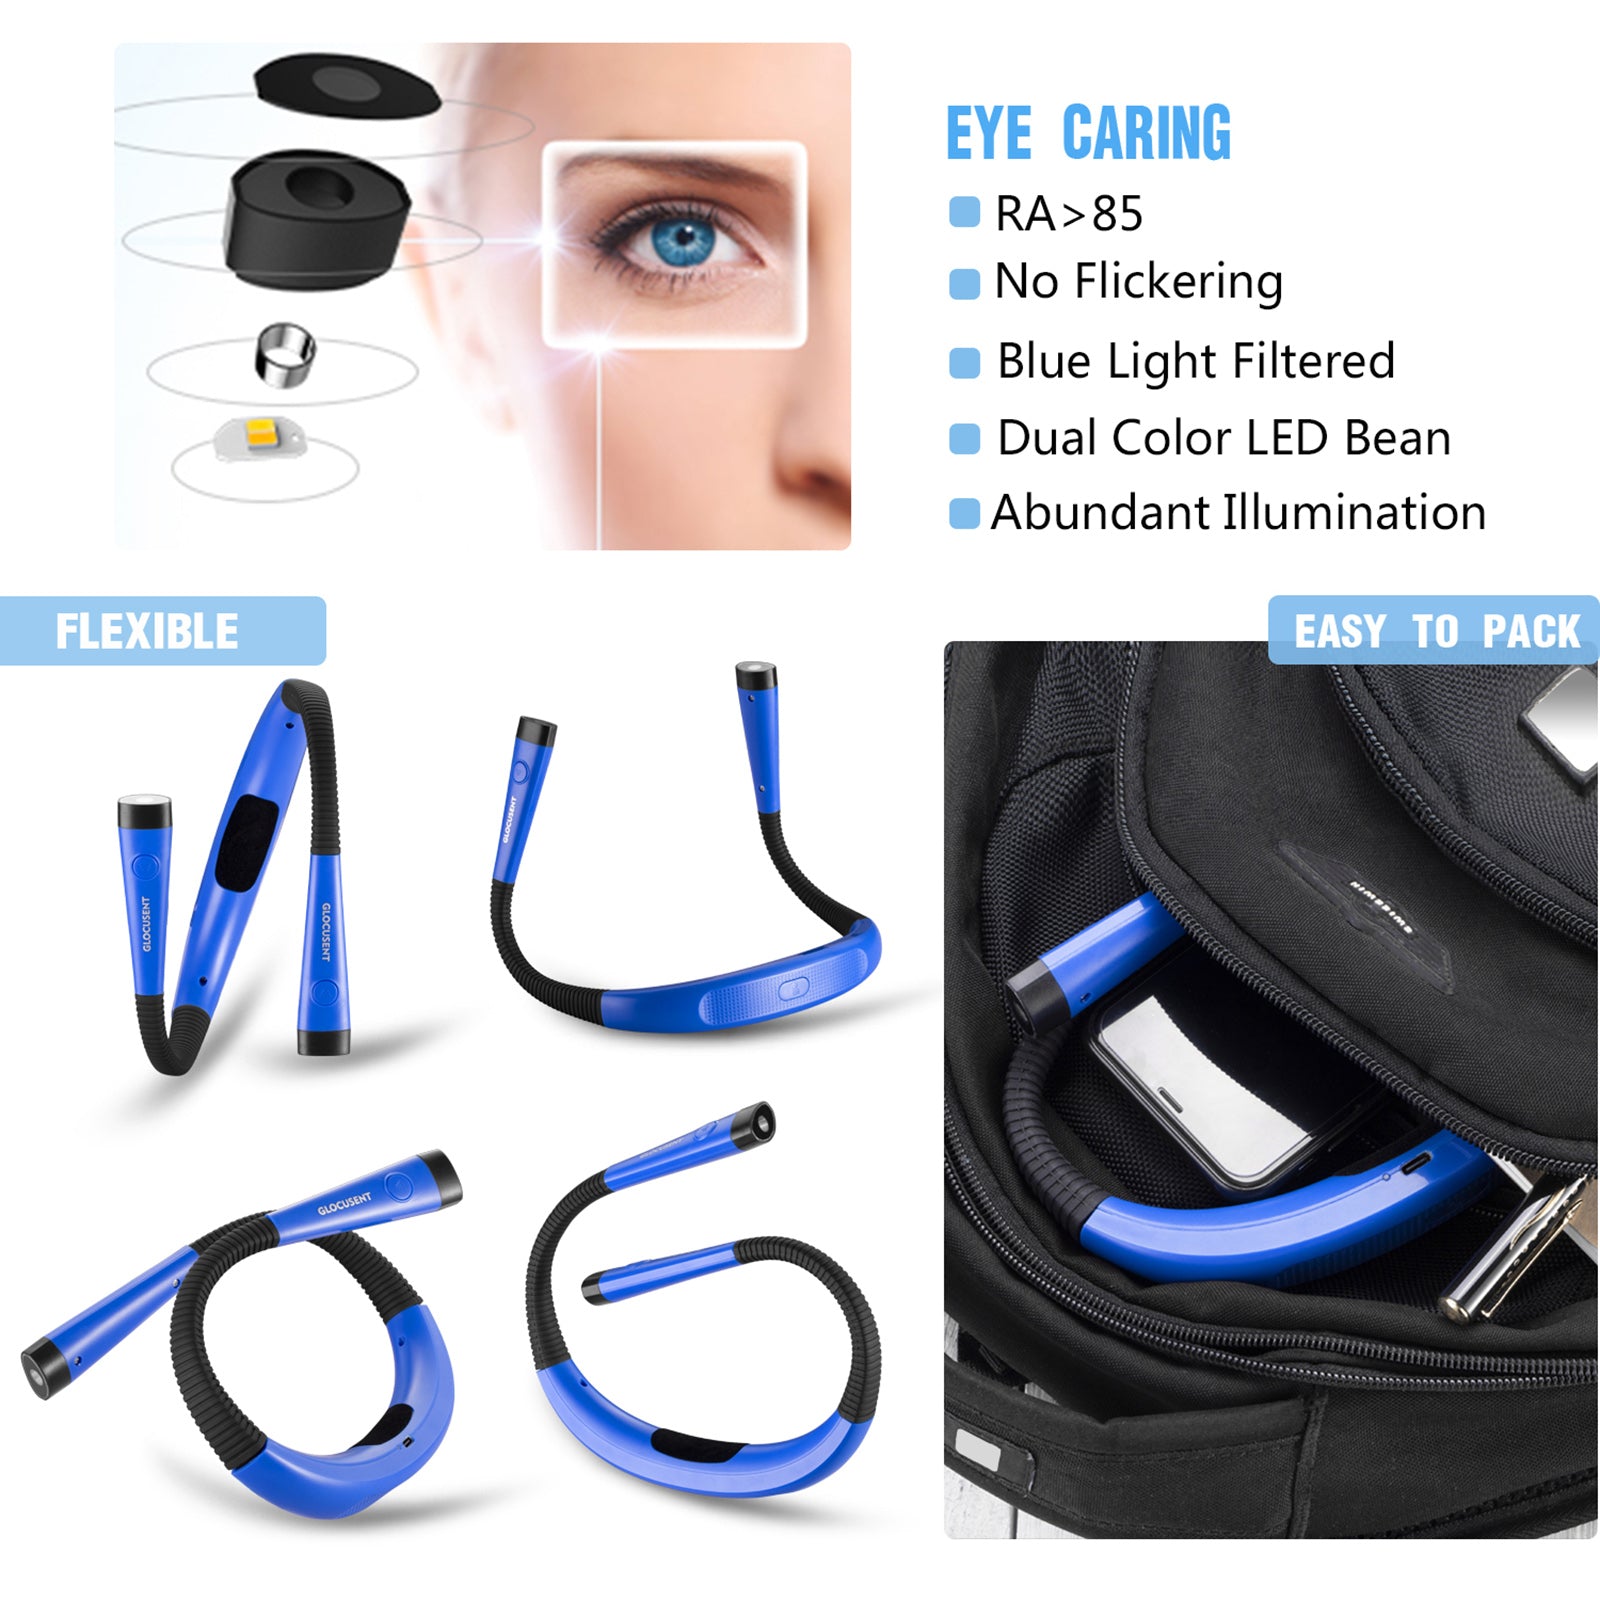 flexible and eye caring neck light